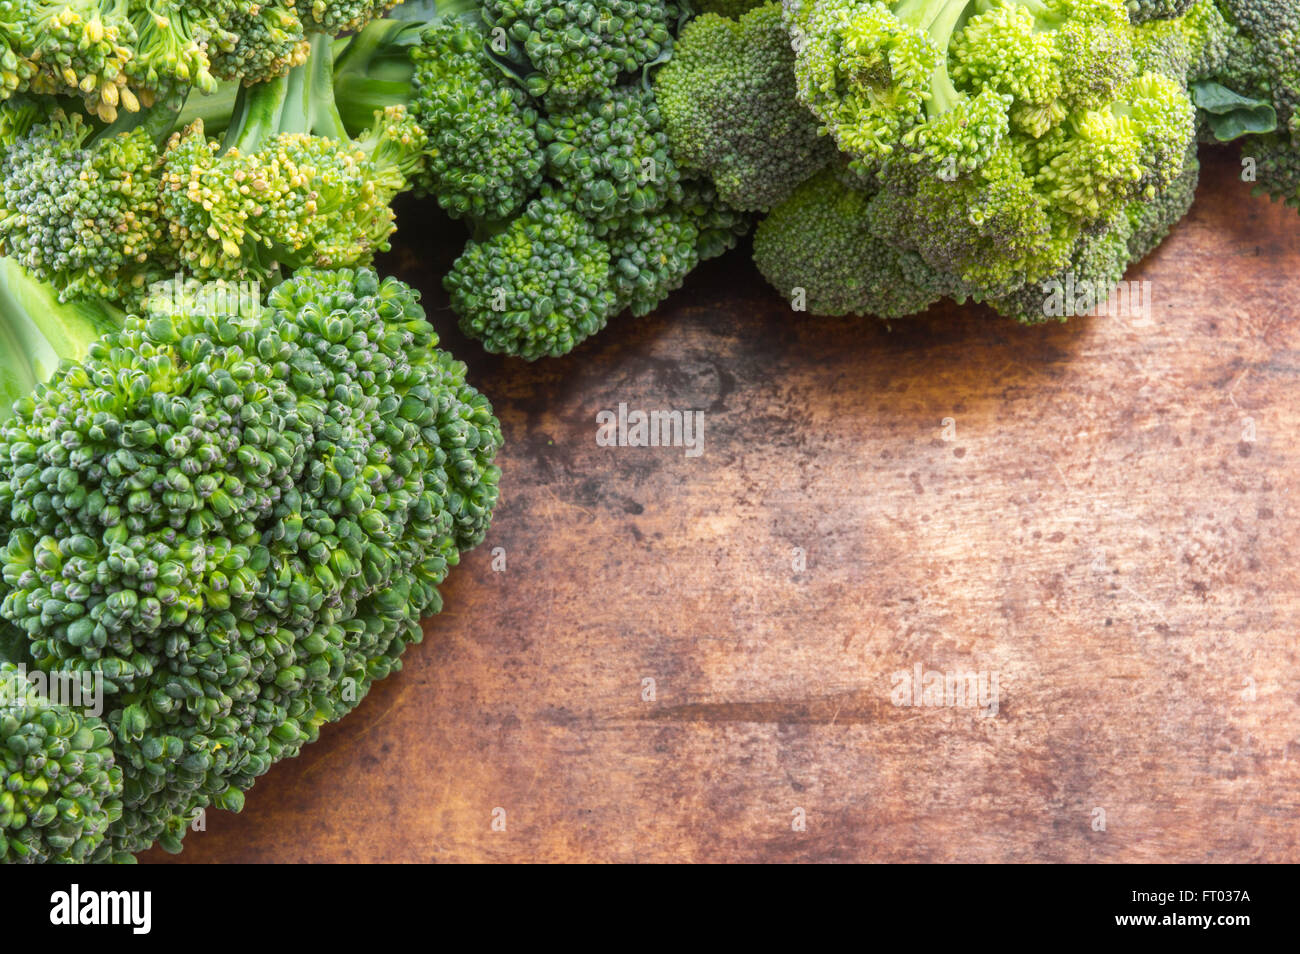 Fresh broccoli on the wooden table Stock Photo